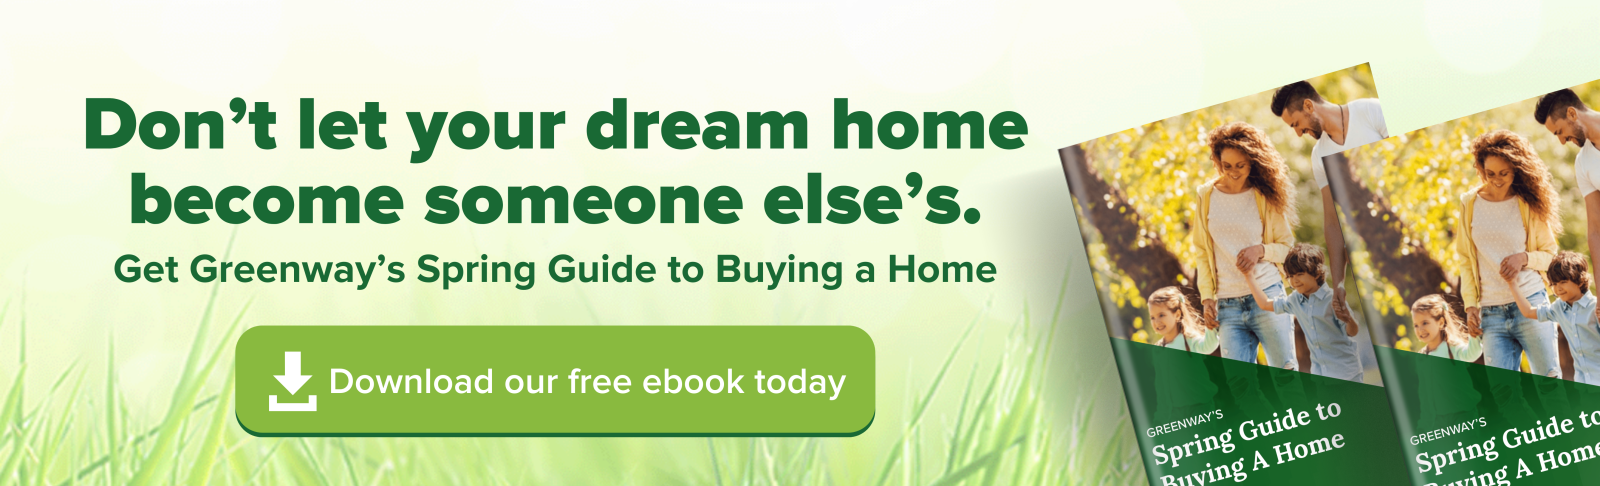 Spring Guide to Buying a Home - Free EBOOK